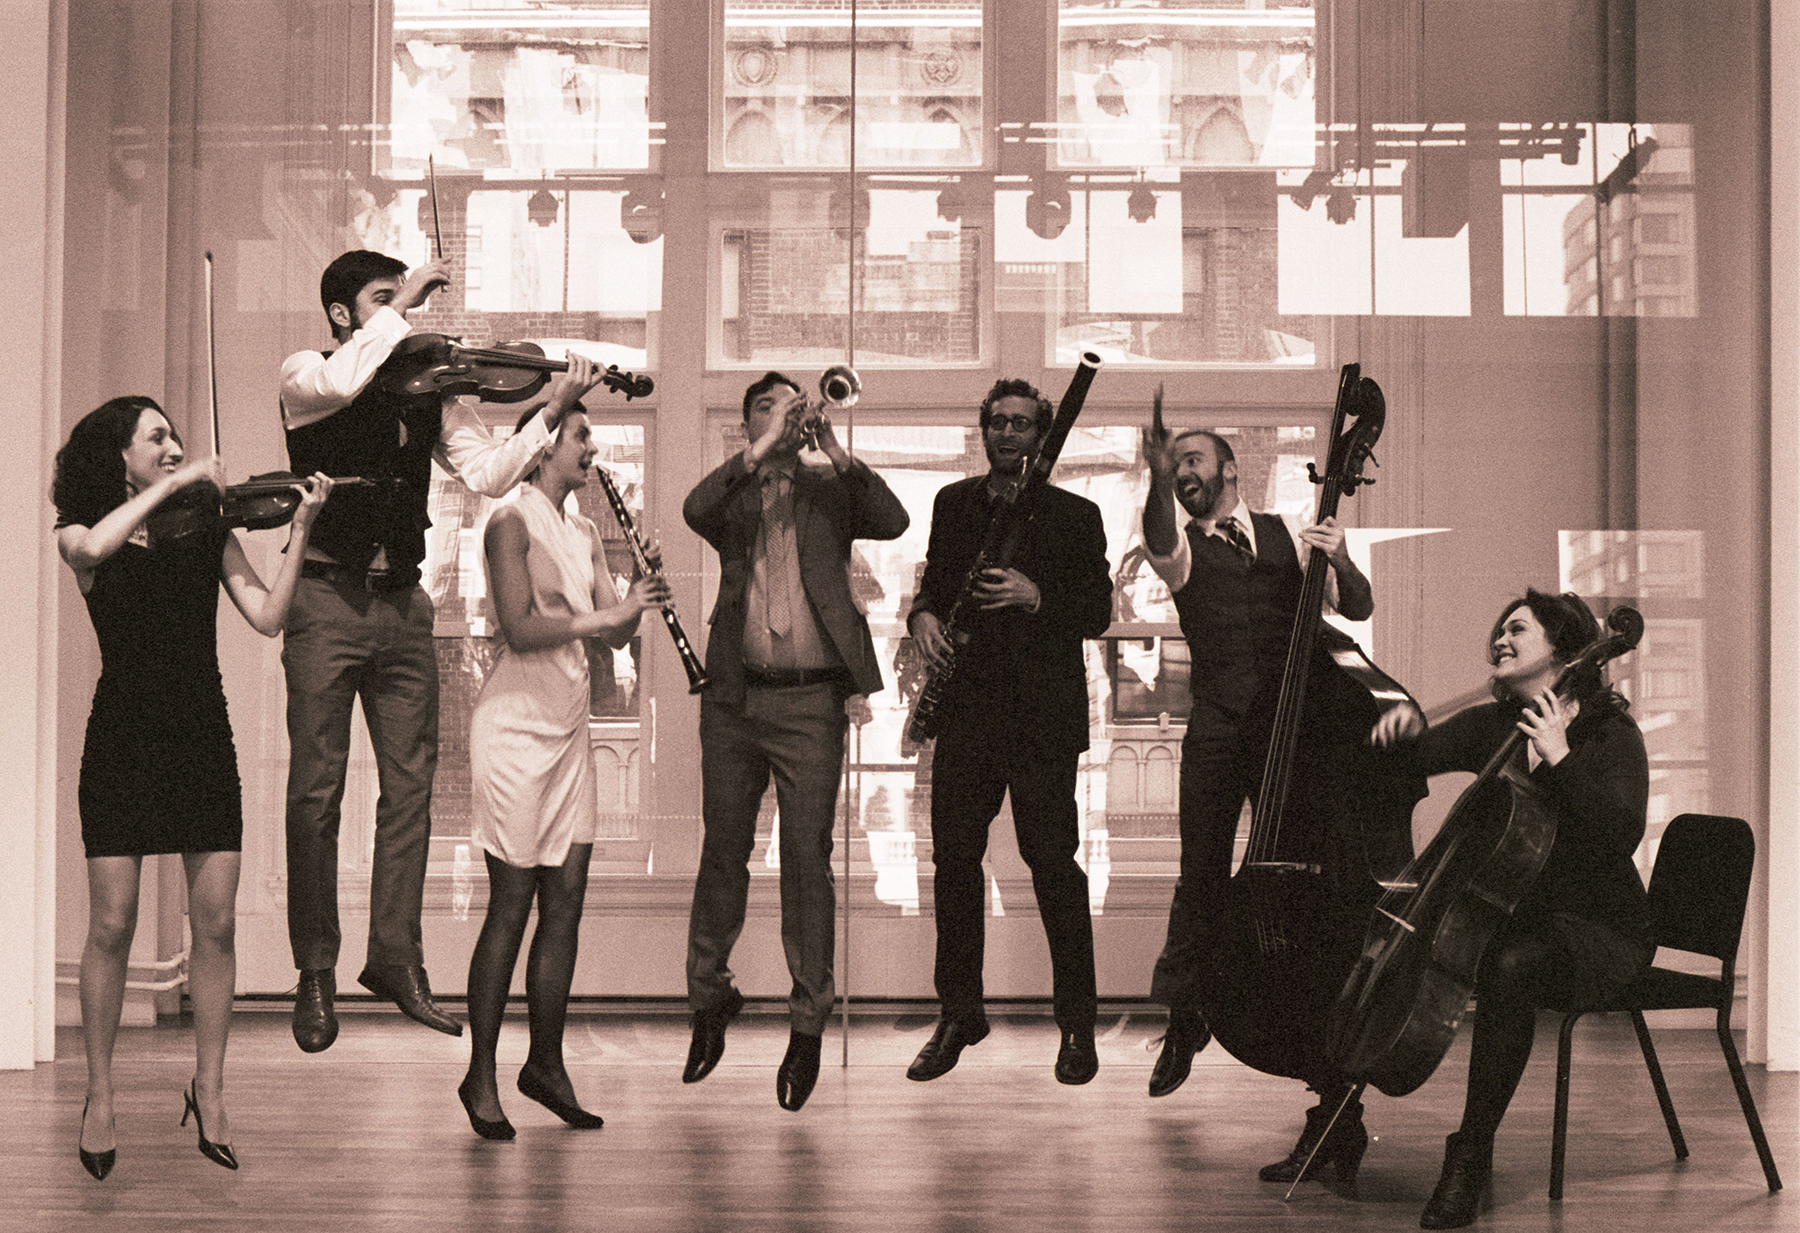 In a sepia-toned photos, a group of seven musicians with instruments